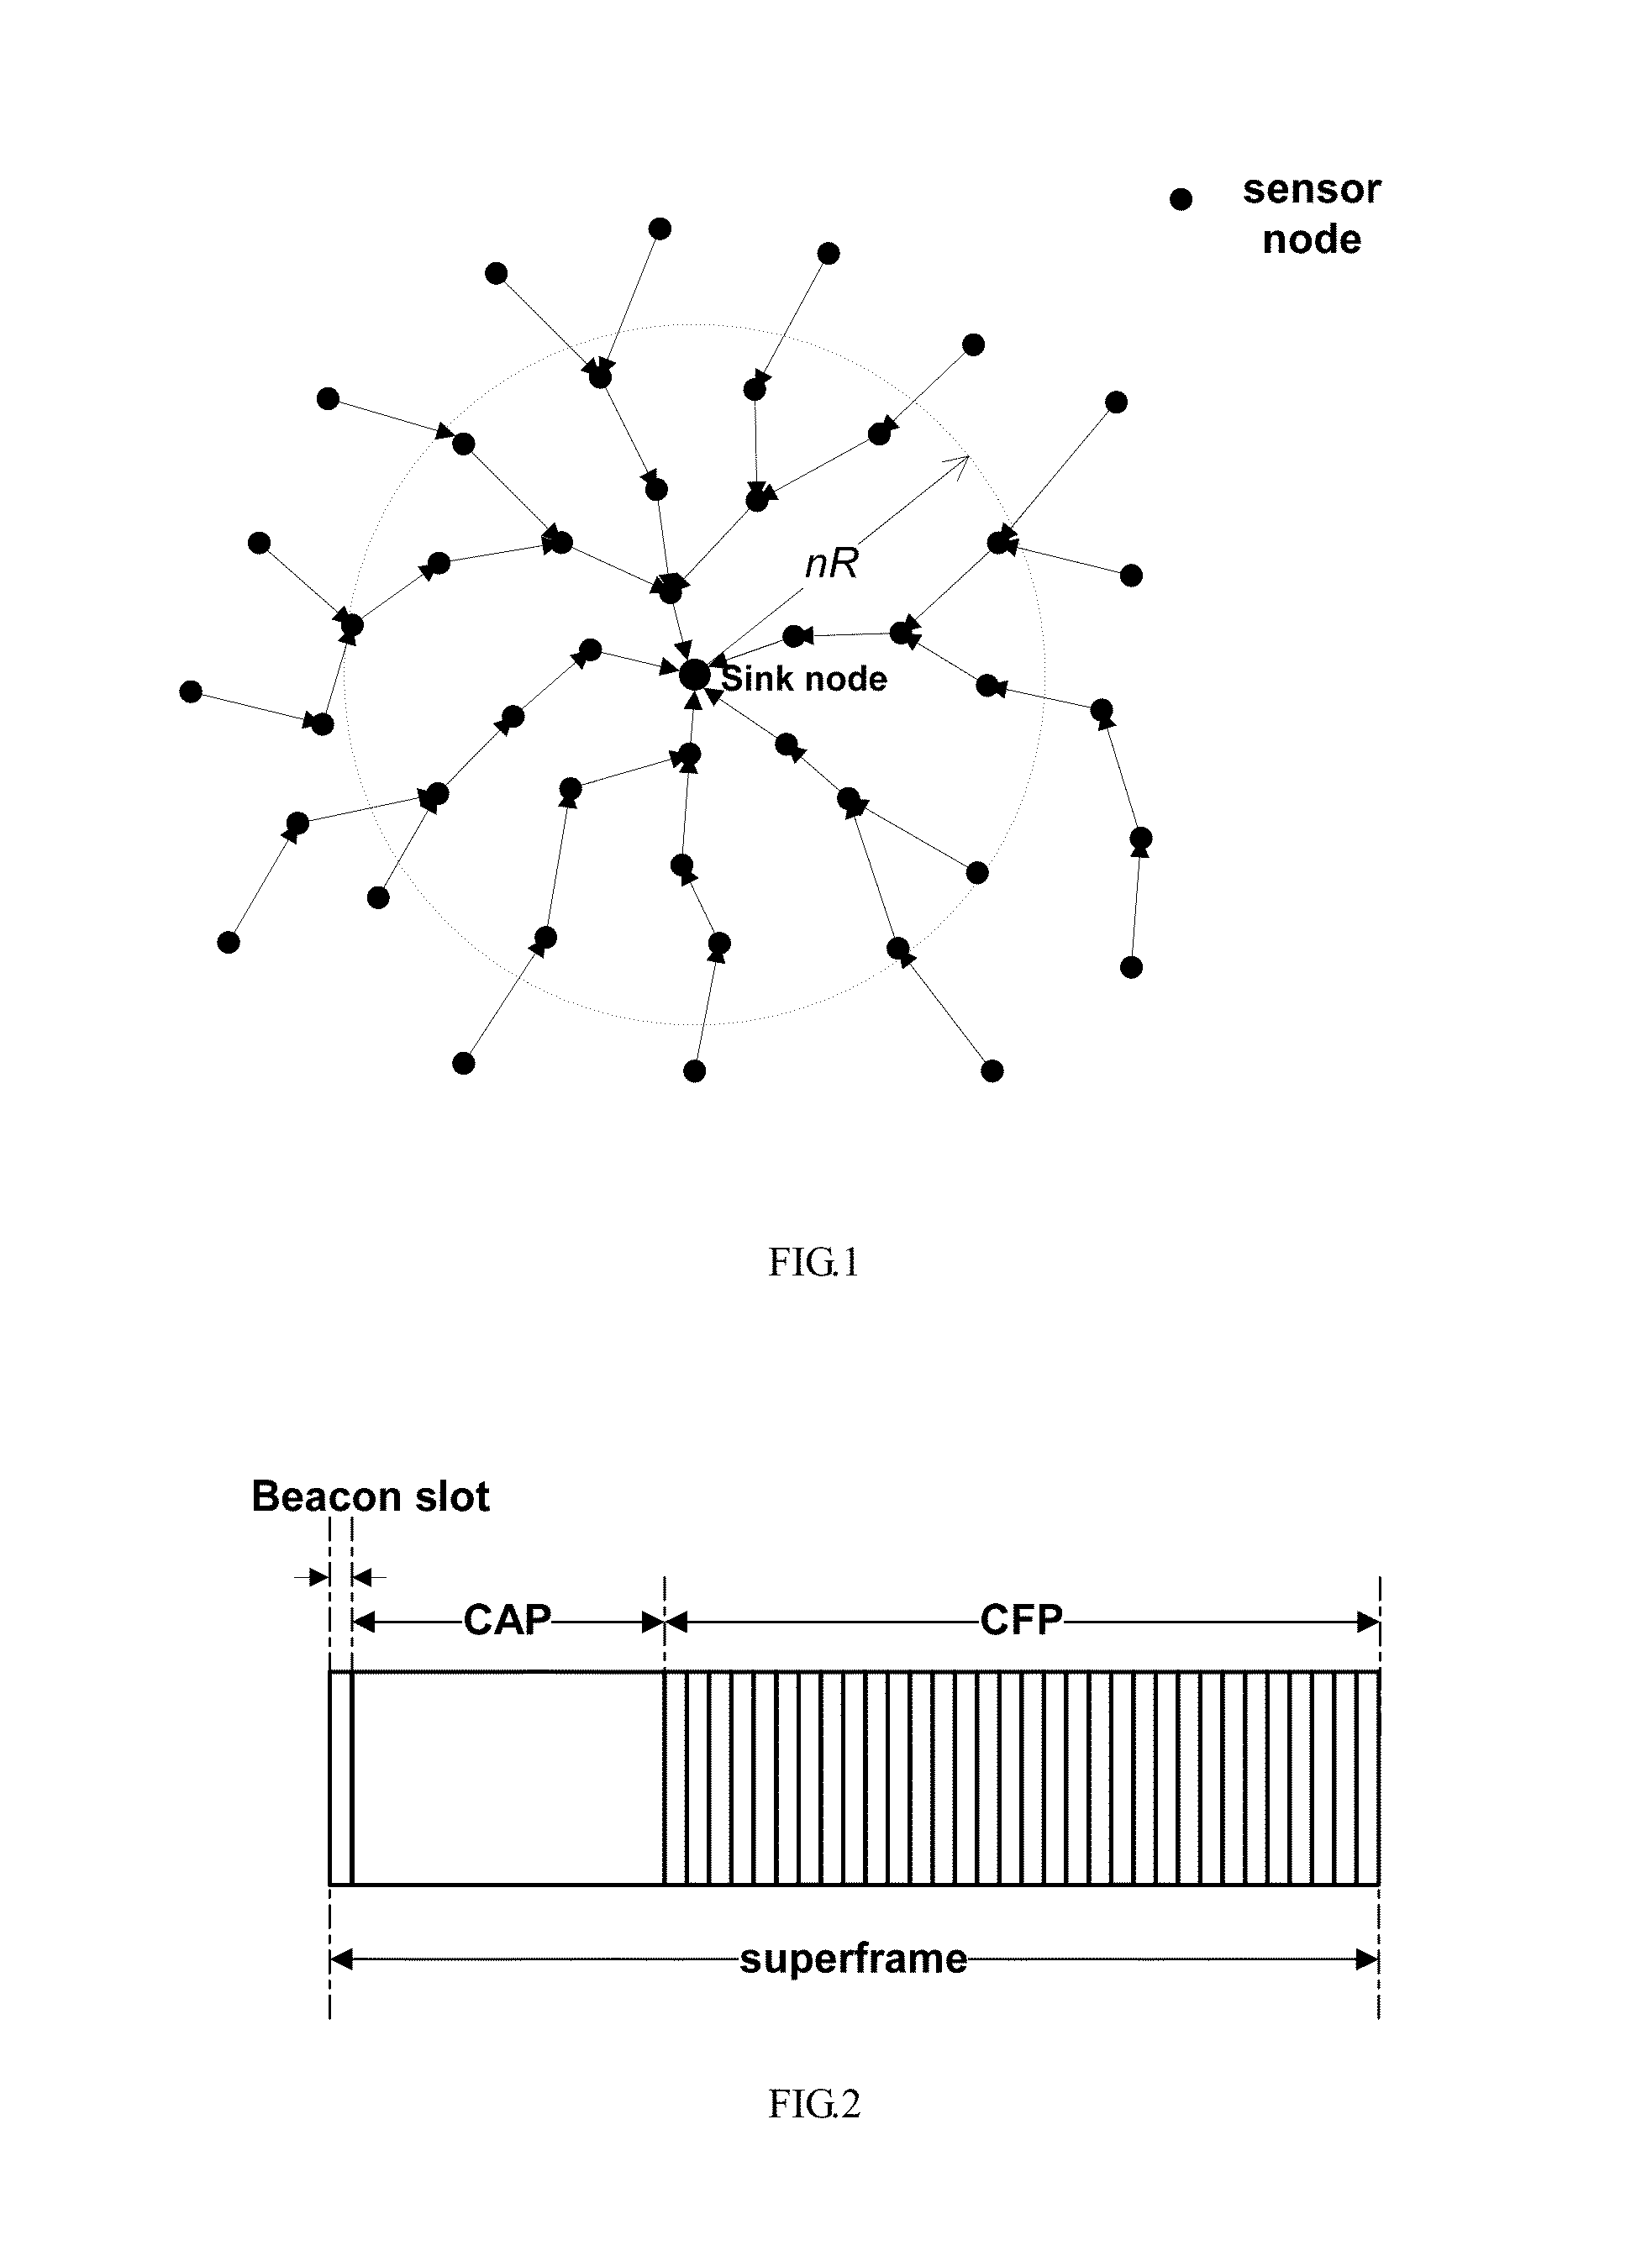 Method and apparatus for assigning slot